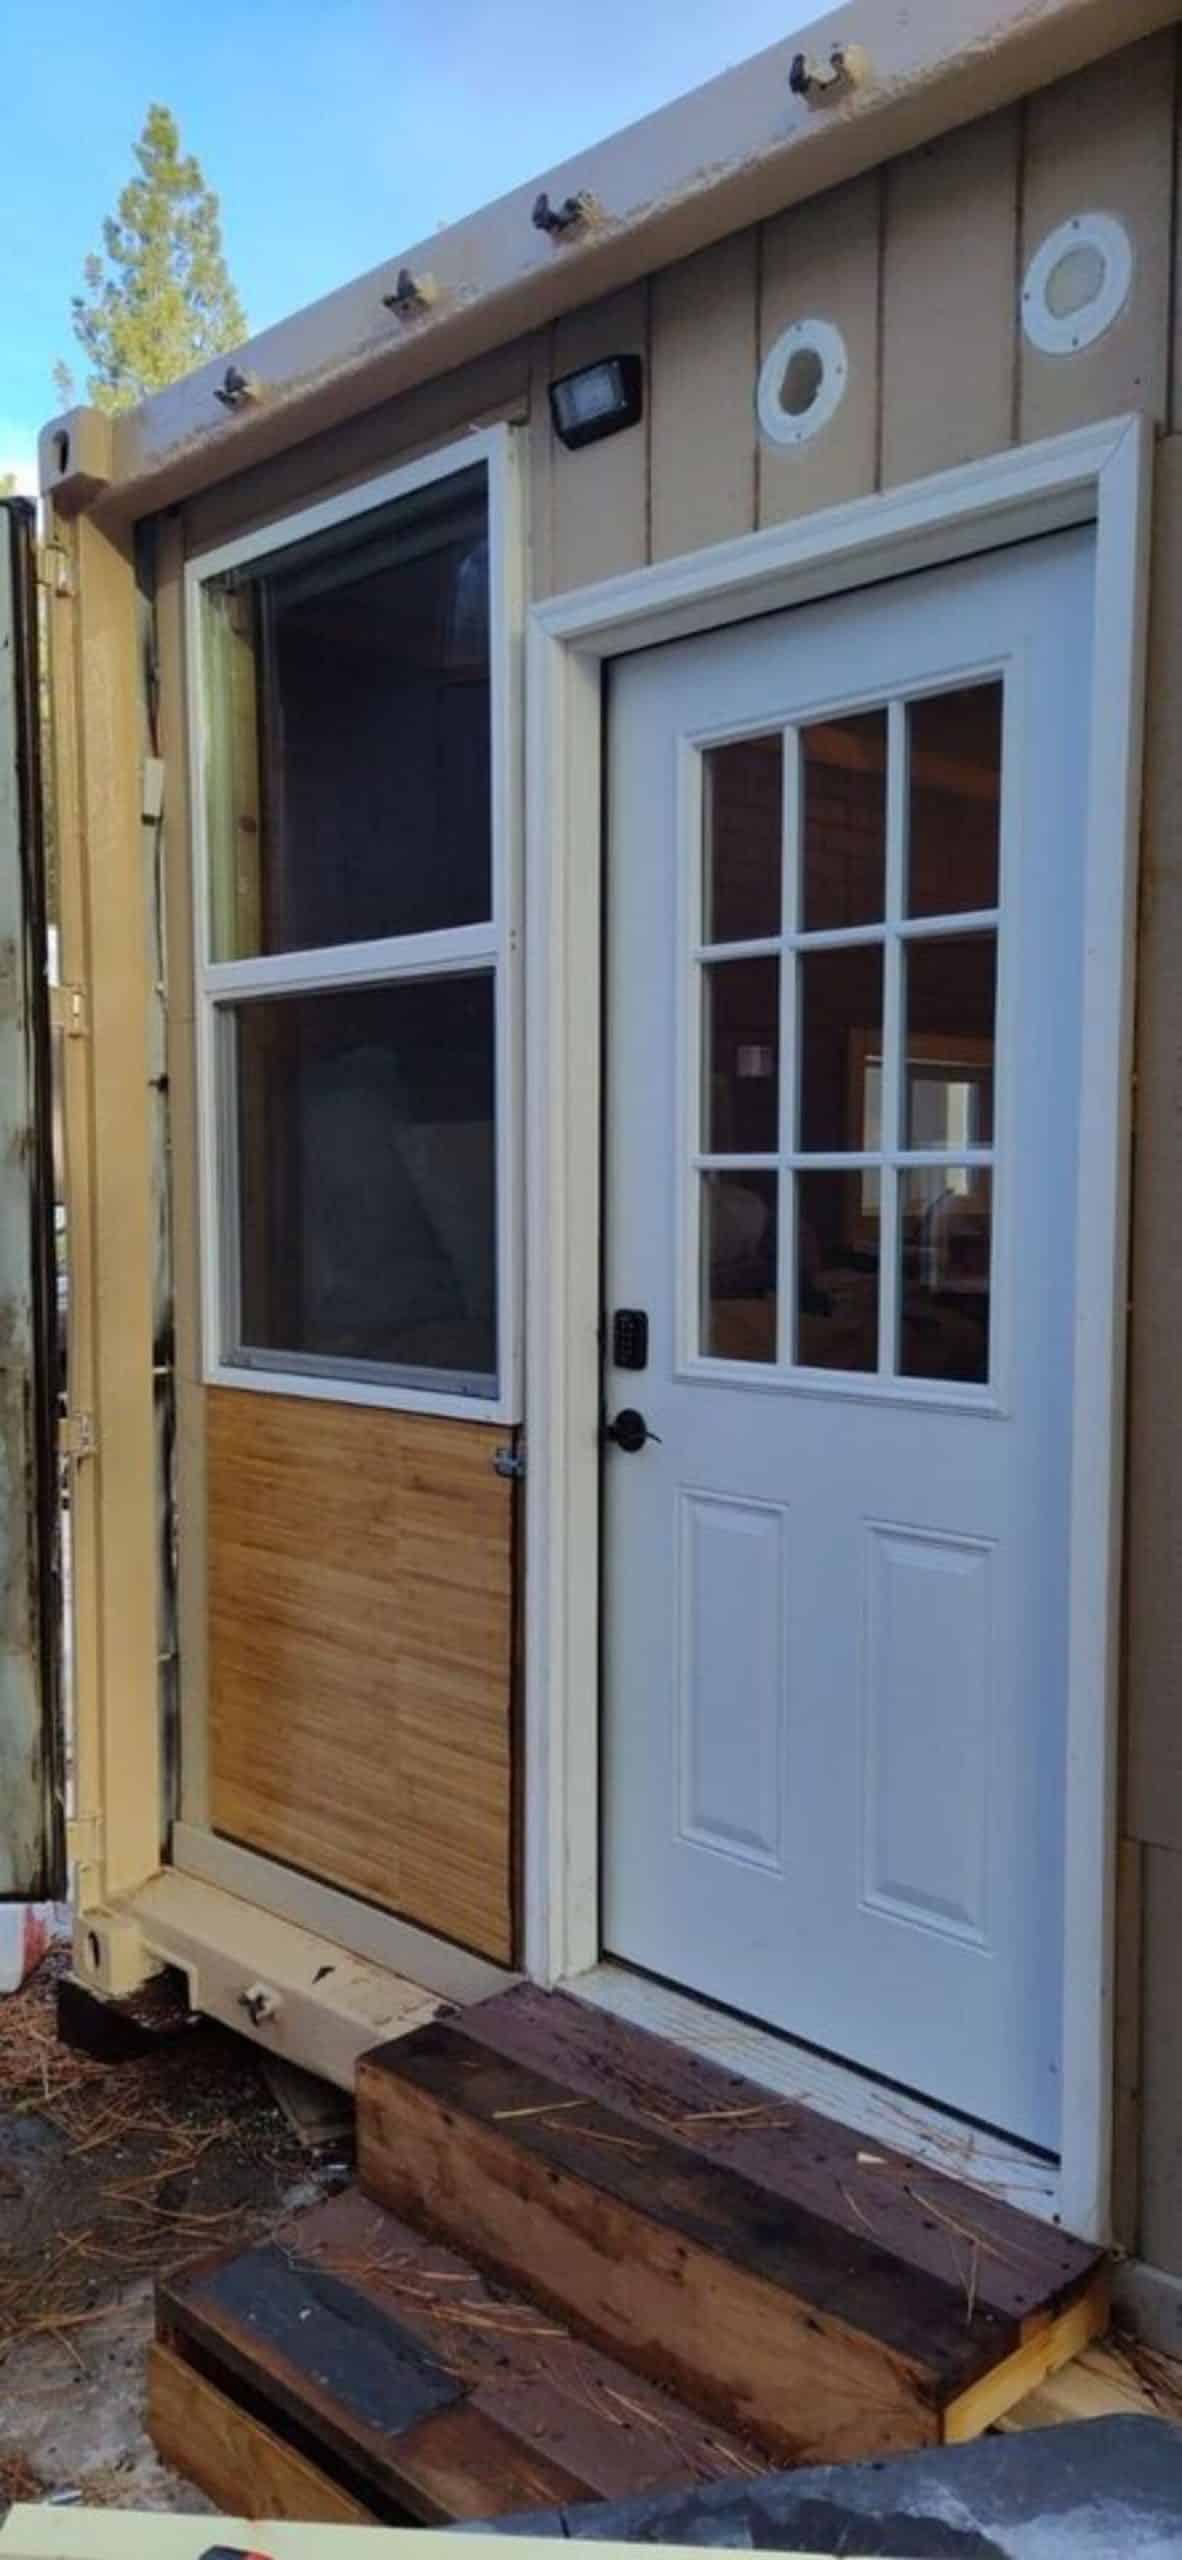 main door view of insulated container home